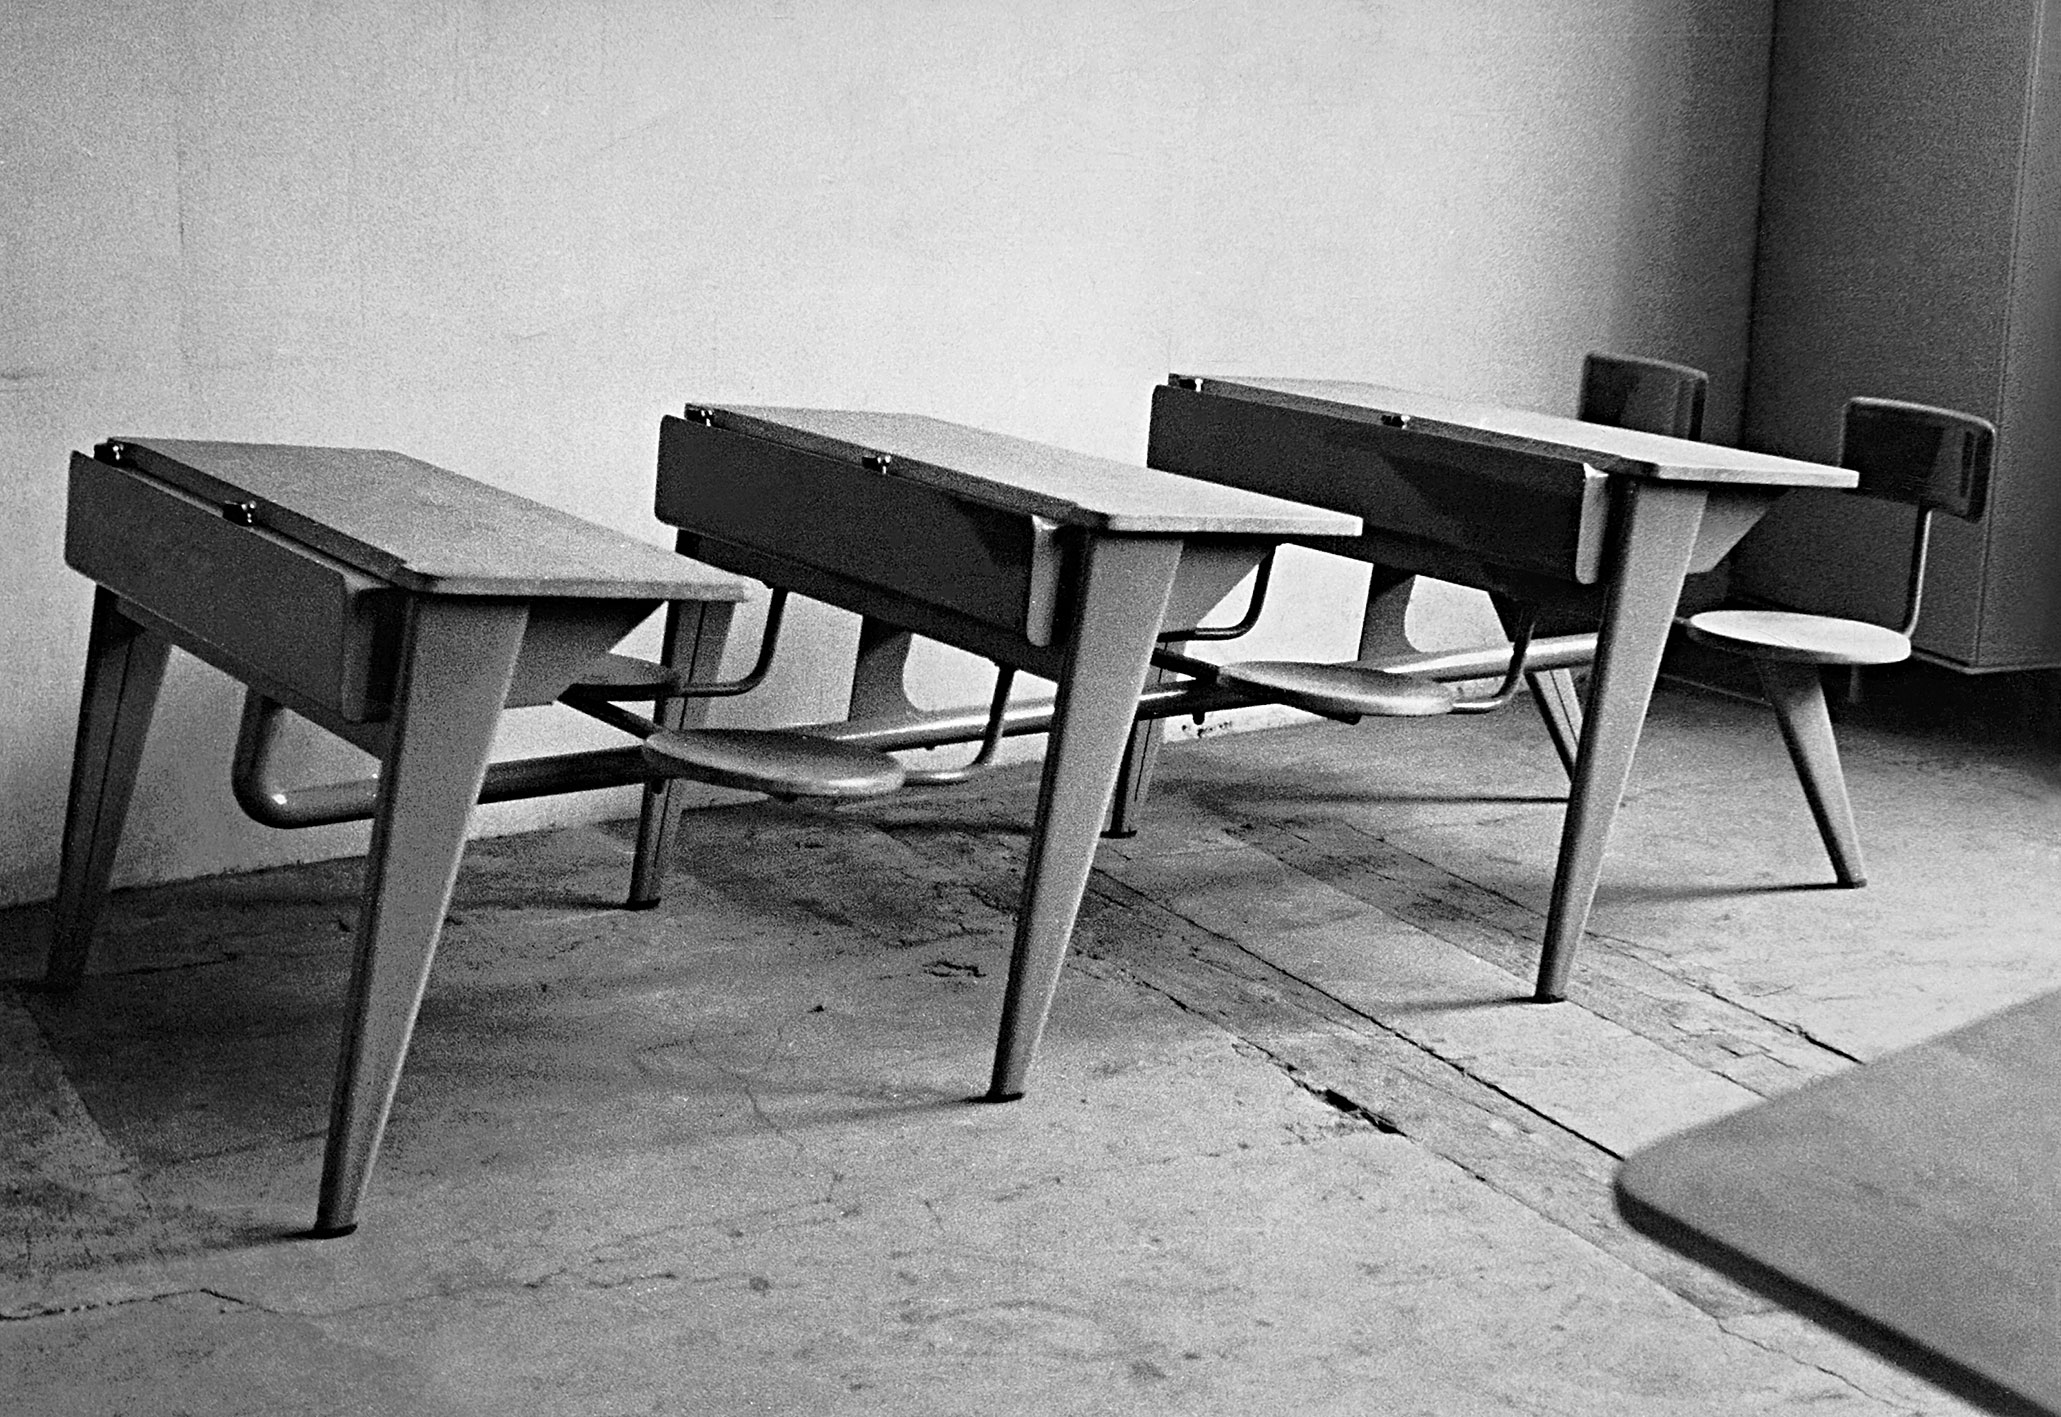 Two-seater school desks no. 59, version for rows, 1935. Prototype with lift-up seats and desk-tops created for the ENP in Metz (architects, Fournez and Sainsaulieu, 1934). Demonstration of assembly.